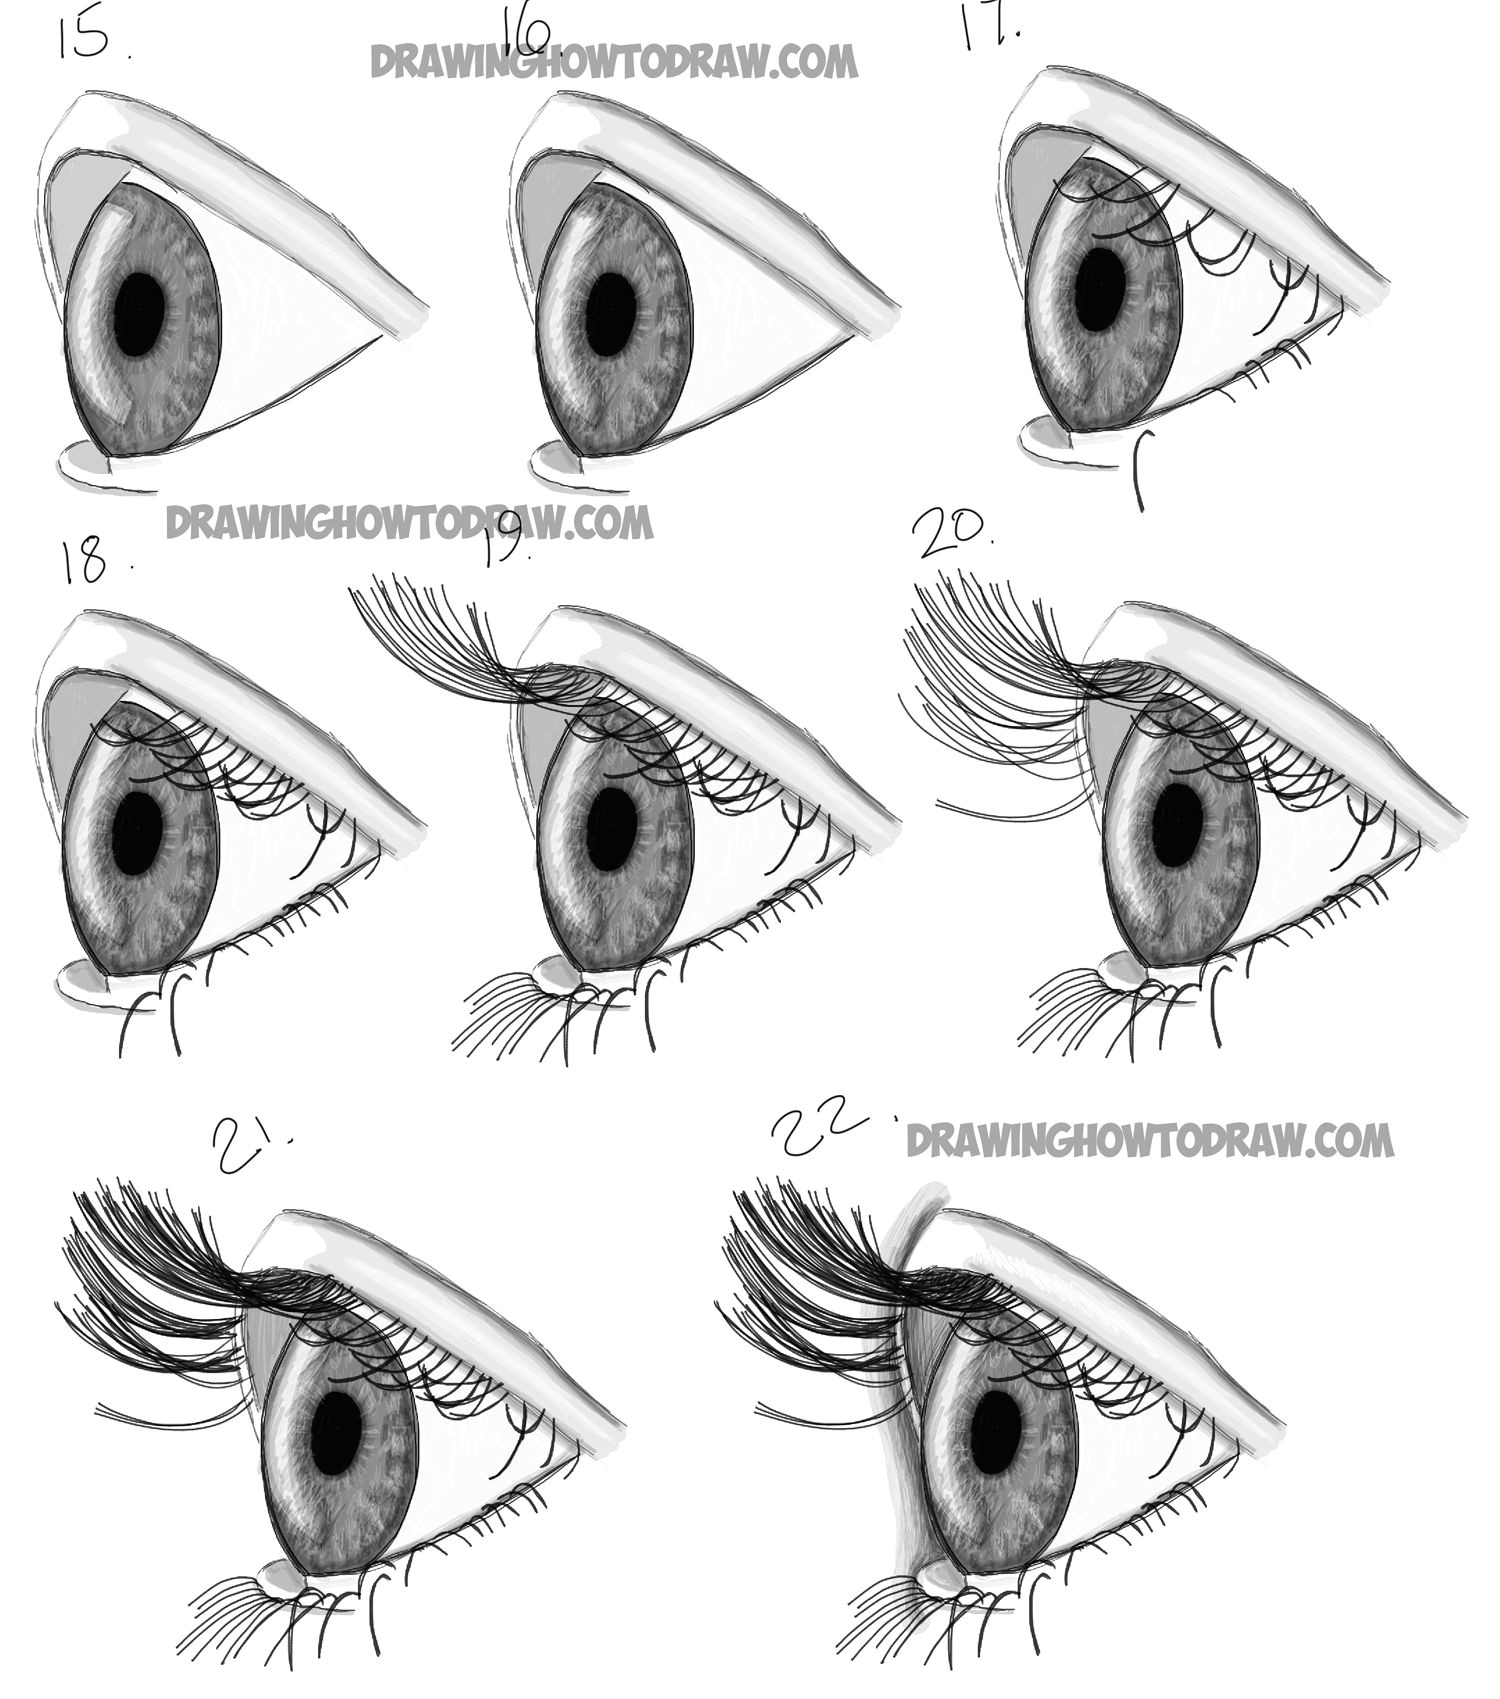 Drawing An Eye Step by Step How to Draw Realistic Eyes From the Side Profile View Step by Step